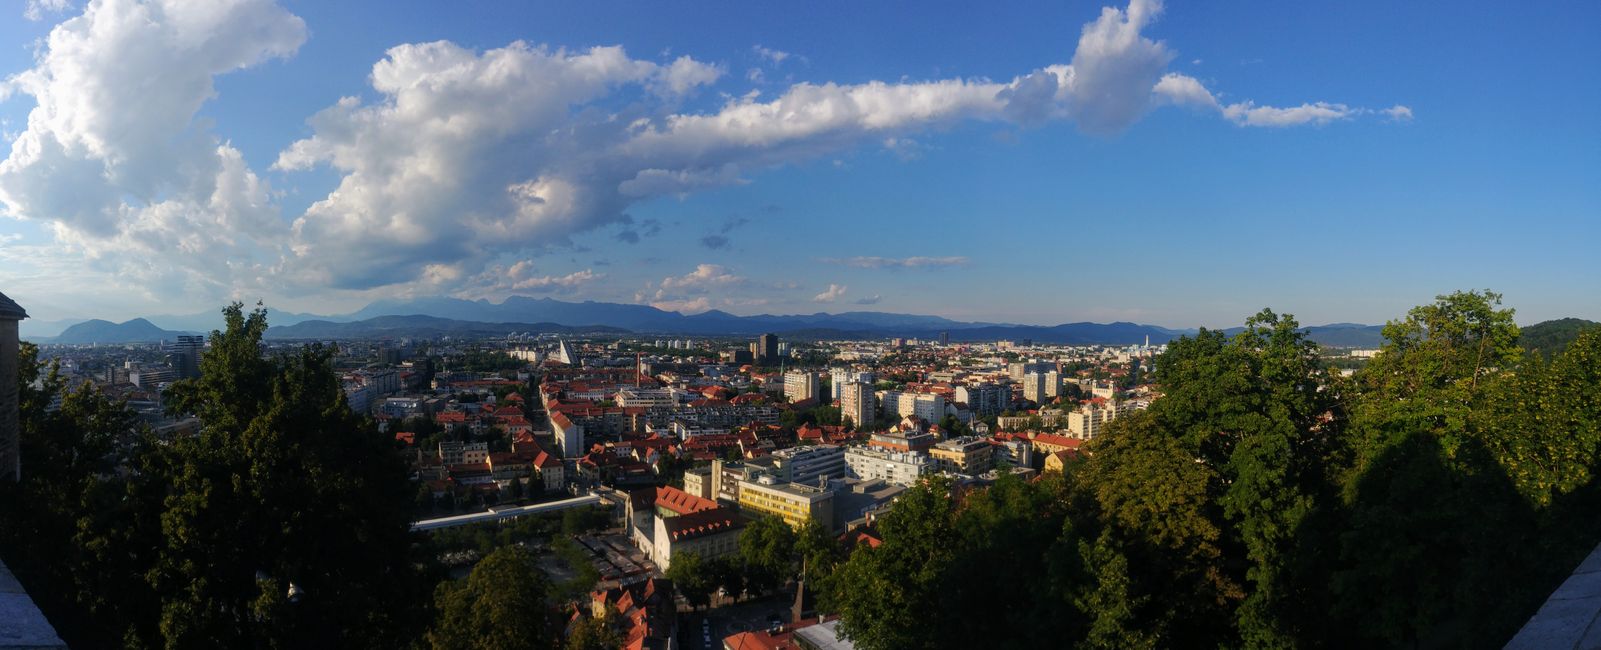 A view from the castle in Ljubljana.